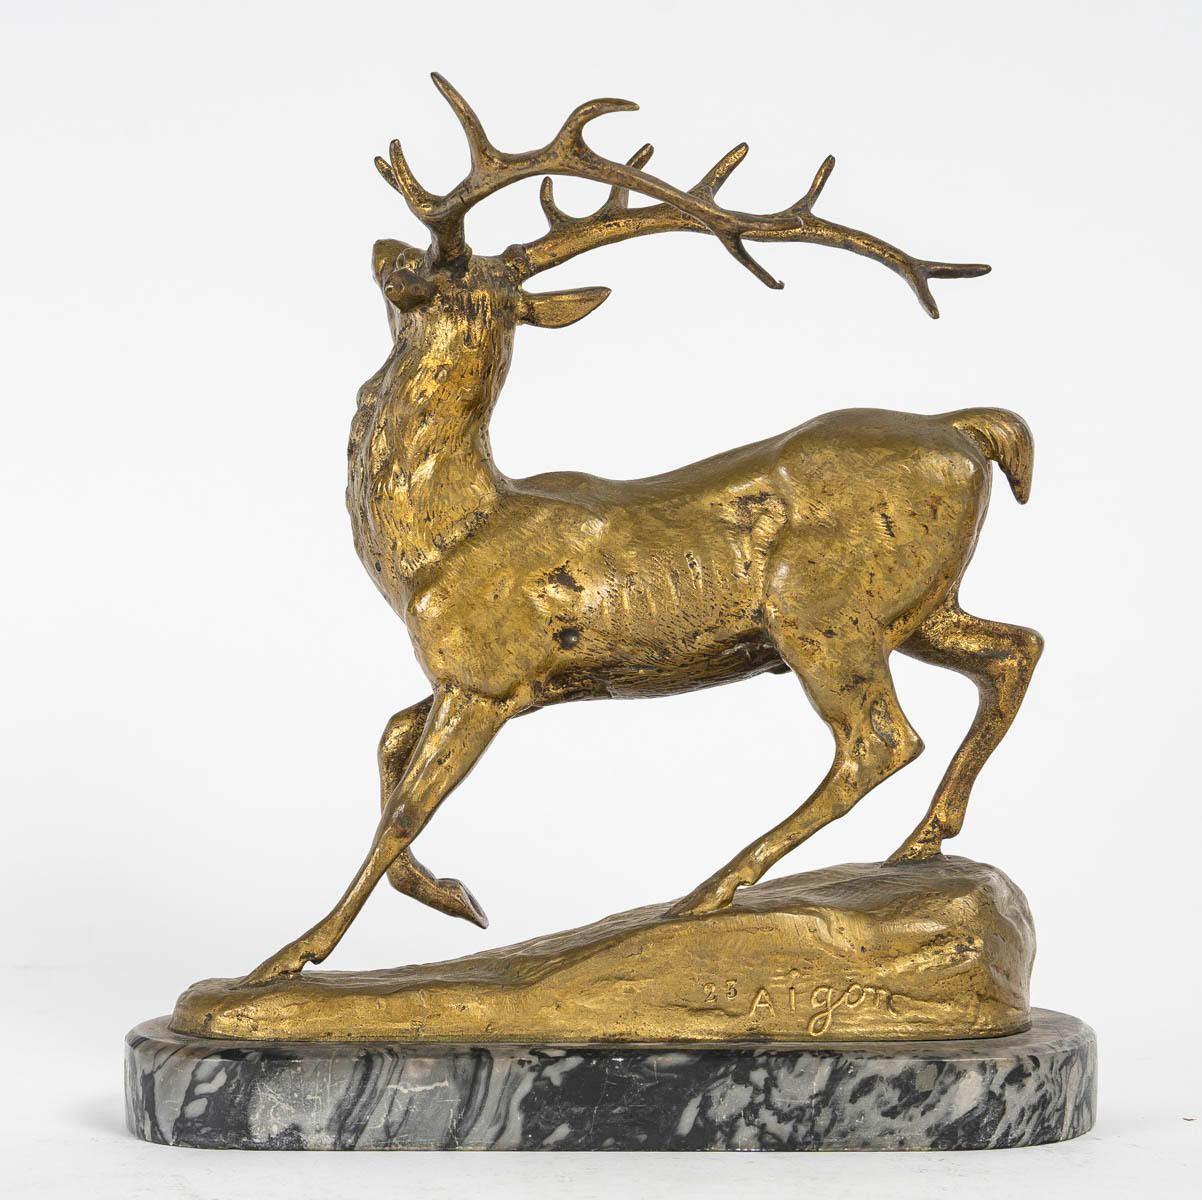 Bronze Sculpture of a Stag in Freedom by Aignon, Sculptor, Napoleon III Period. For Sale